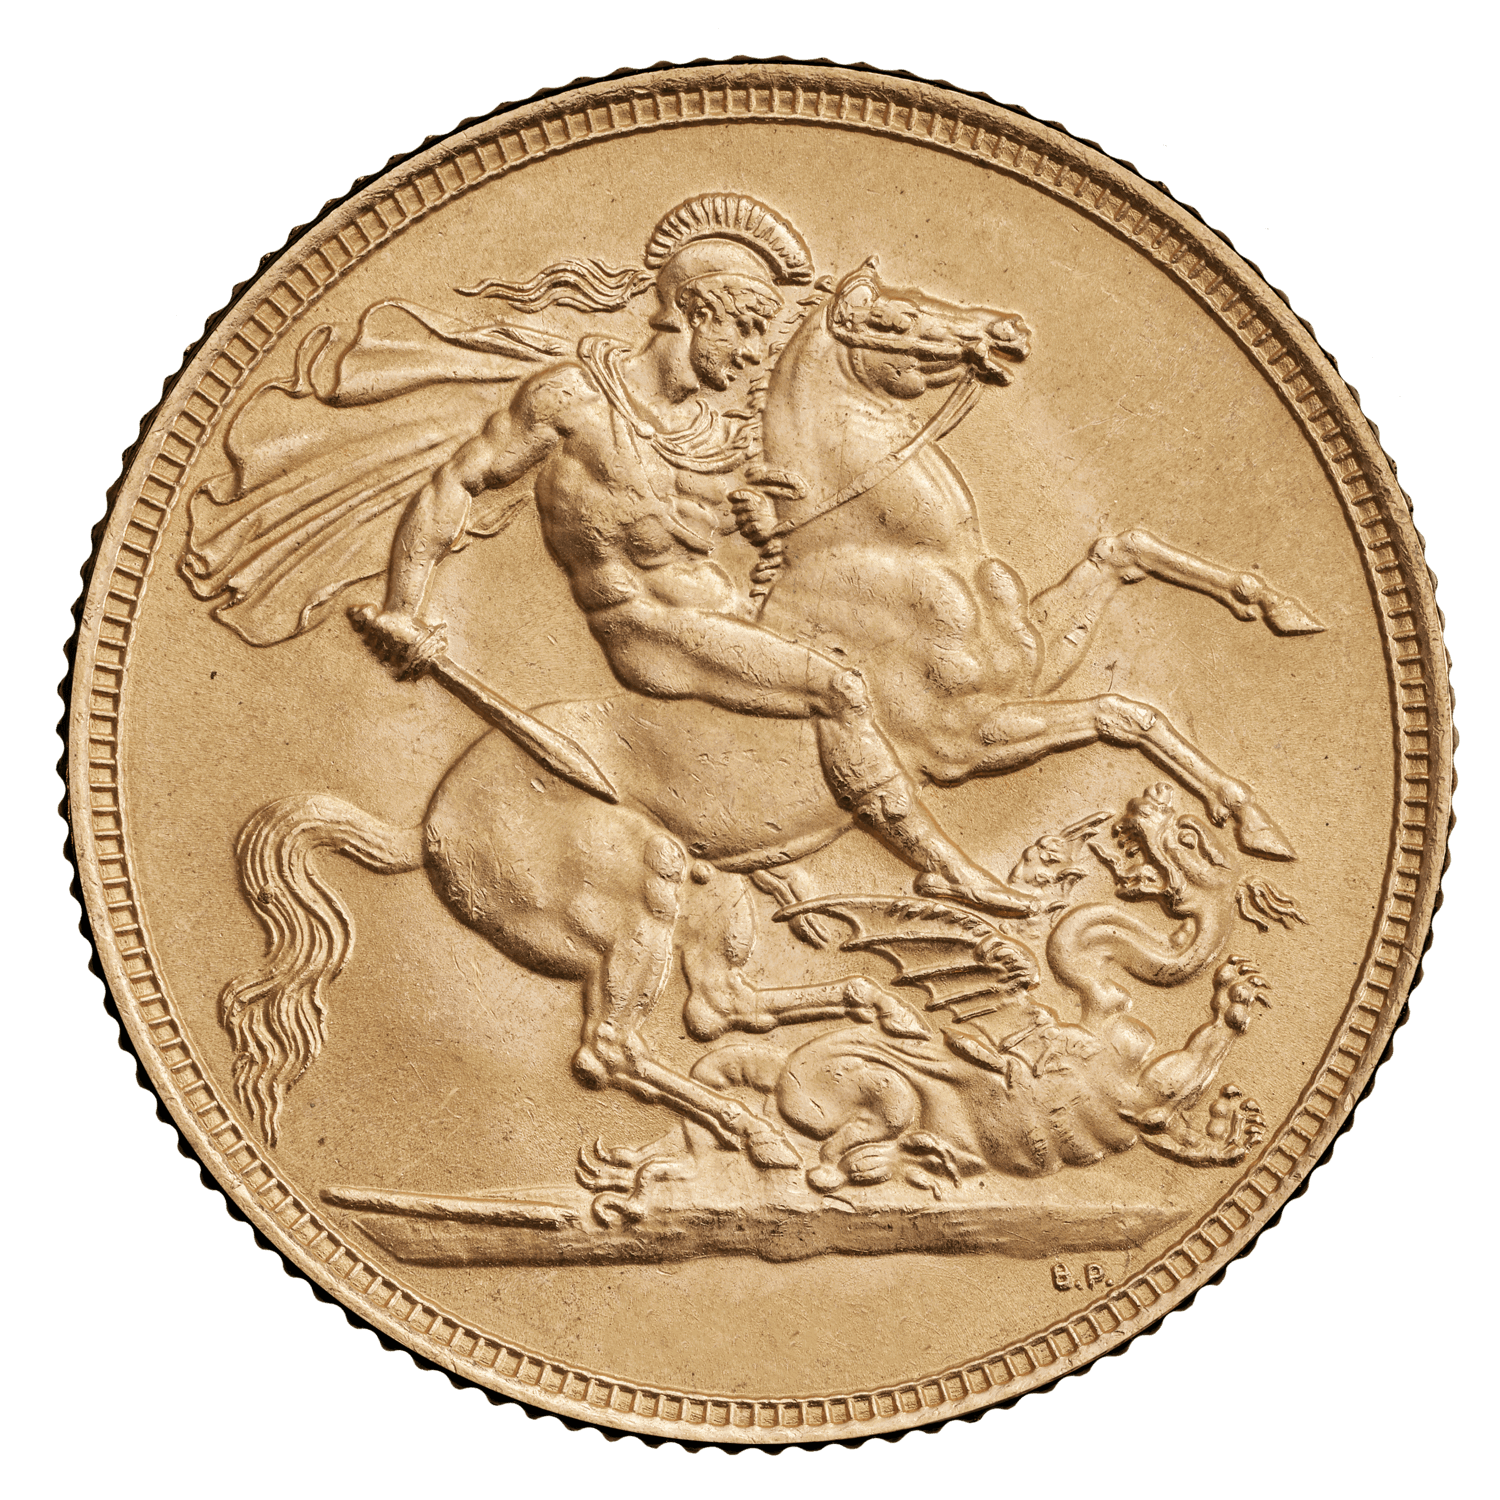 The Sovereign Pre-Owned Gold Bullion Coin